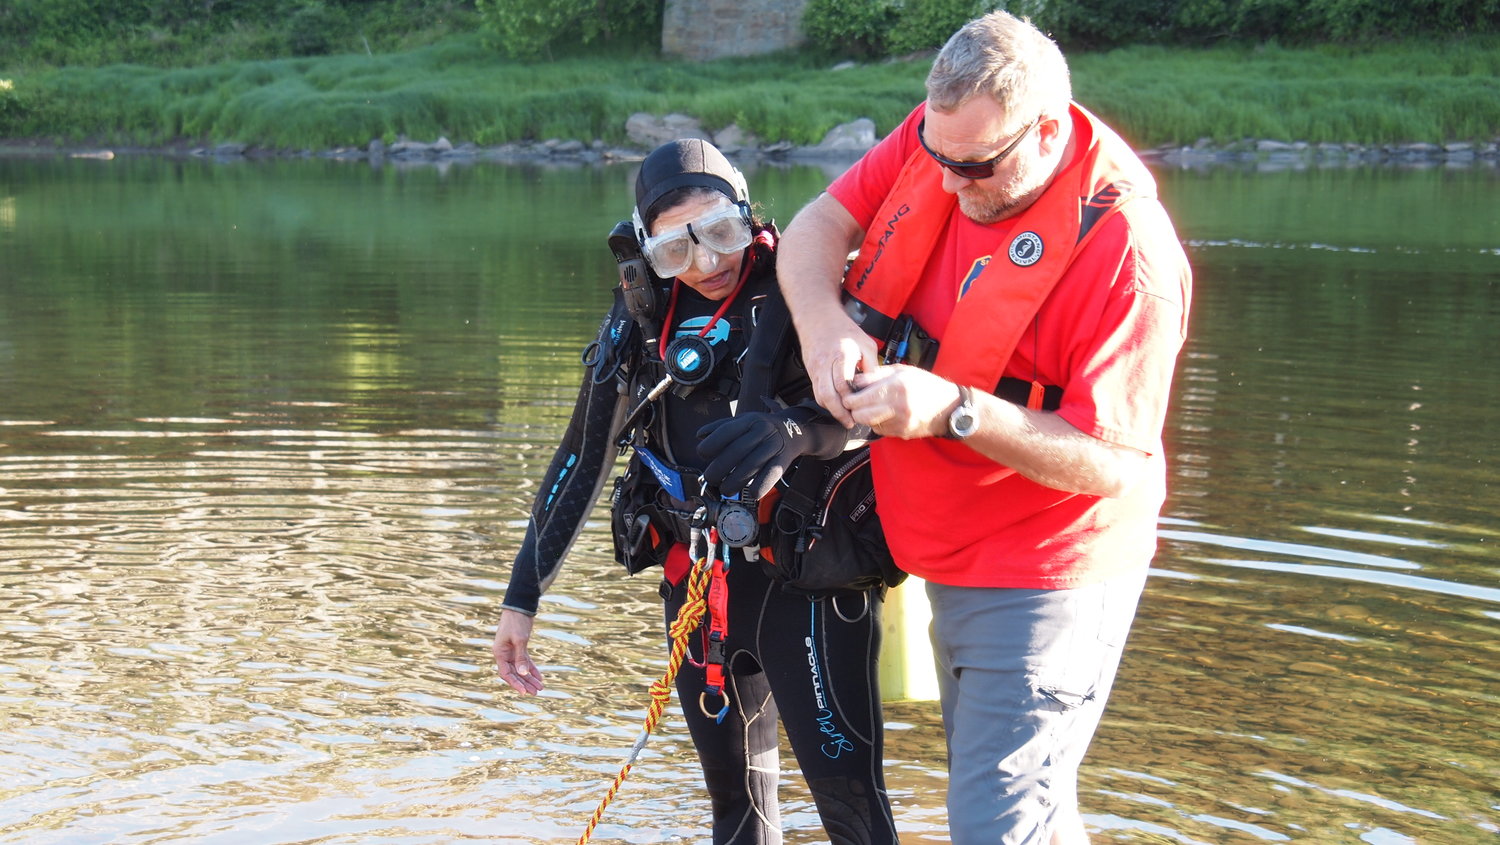 Sharon Doyle, left, a member of the Neversink Fire Department and president of the Sullivan County Dive Team, gets assistance from Joe Ratner, the dive team captain and a member of the Youngsville Fire Department.  The team was at Skinner's Falls in a drill hosted by the Cochecton Ambulance Corp. on June 16.